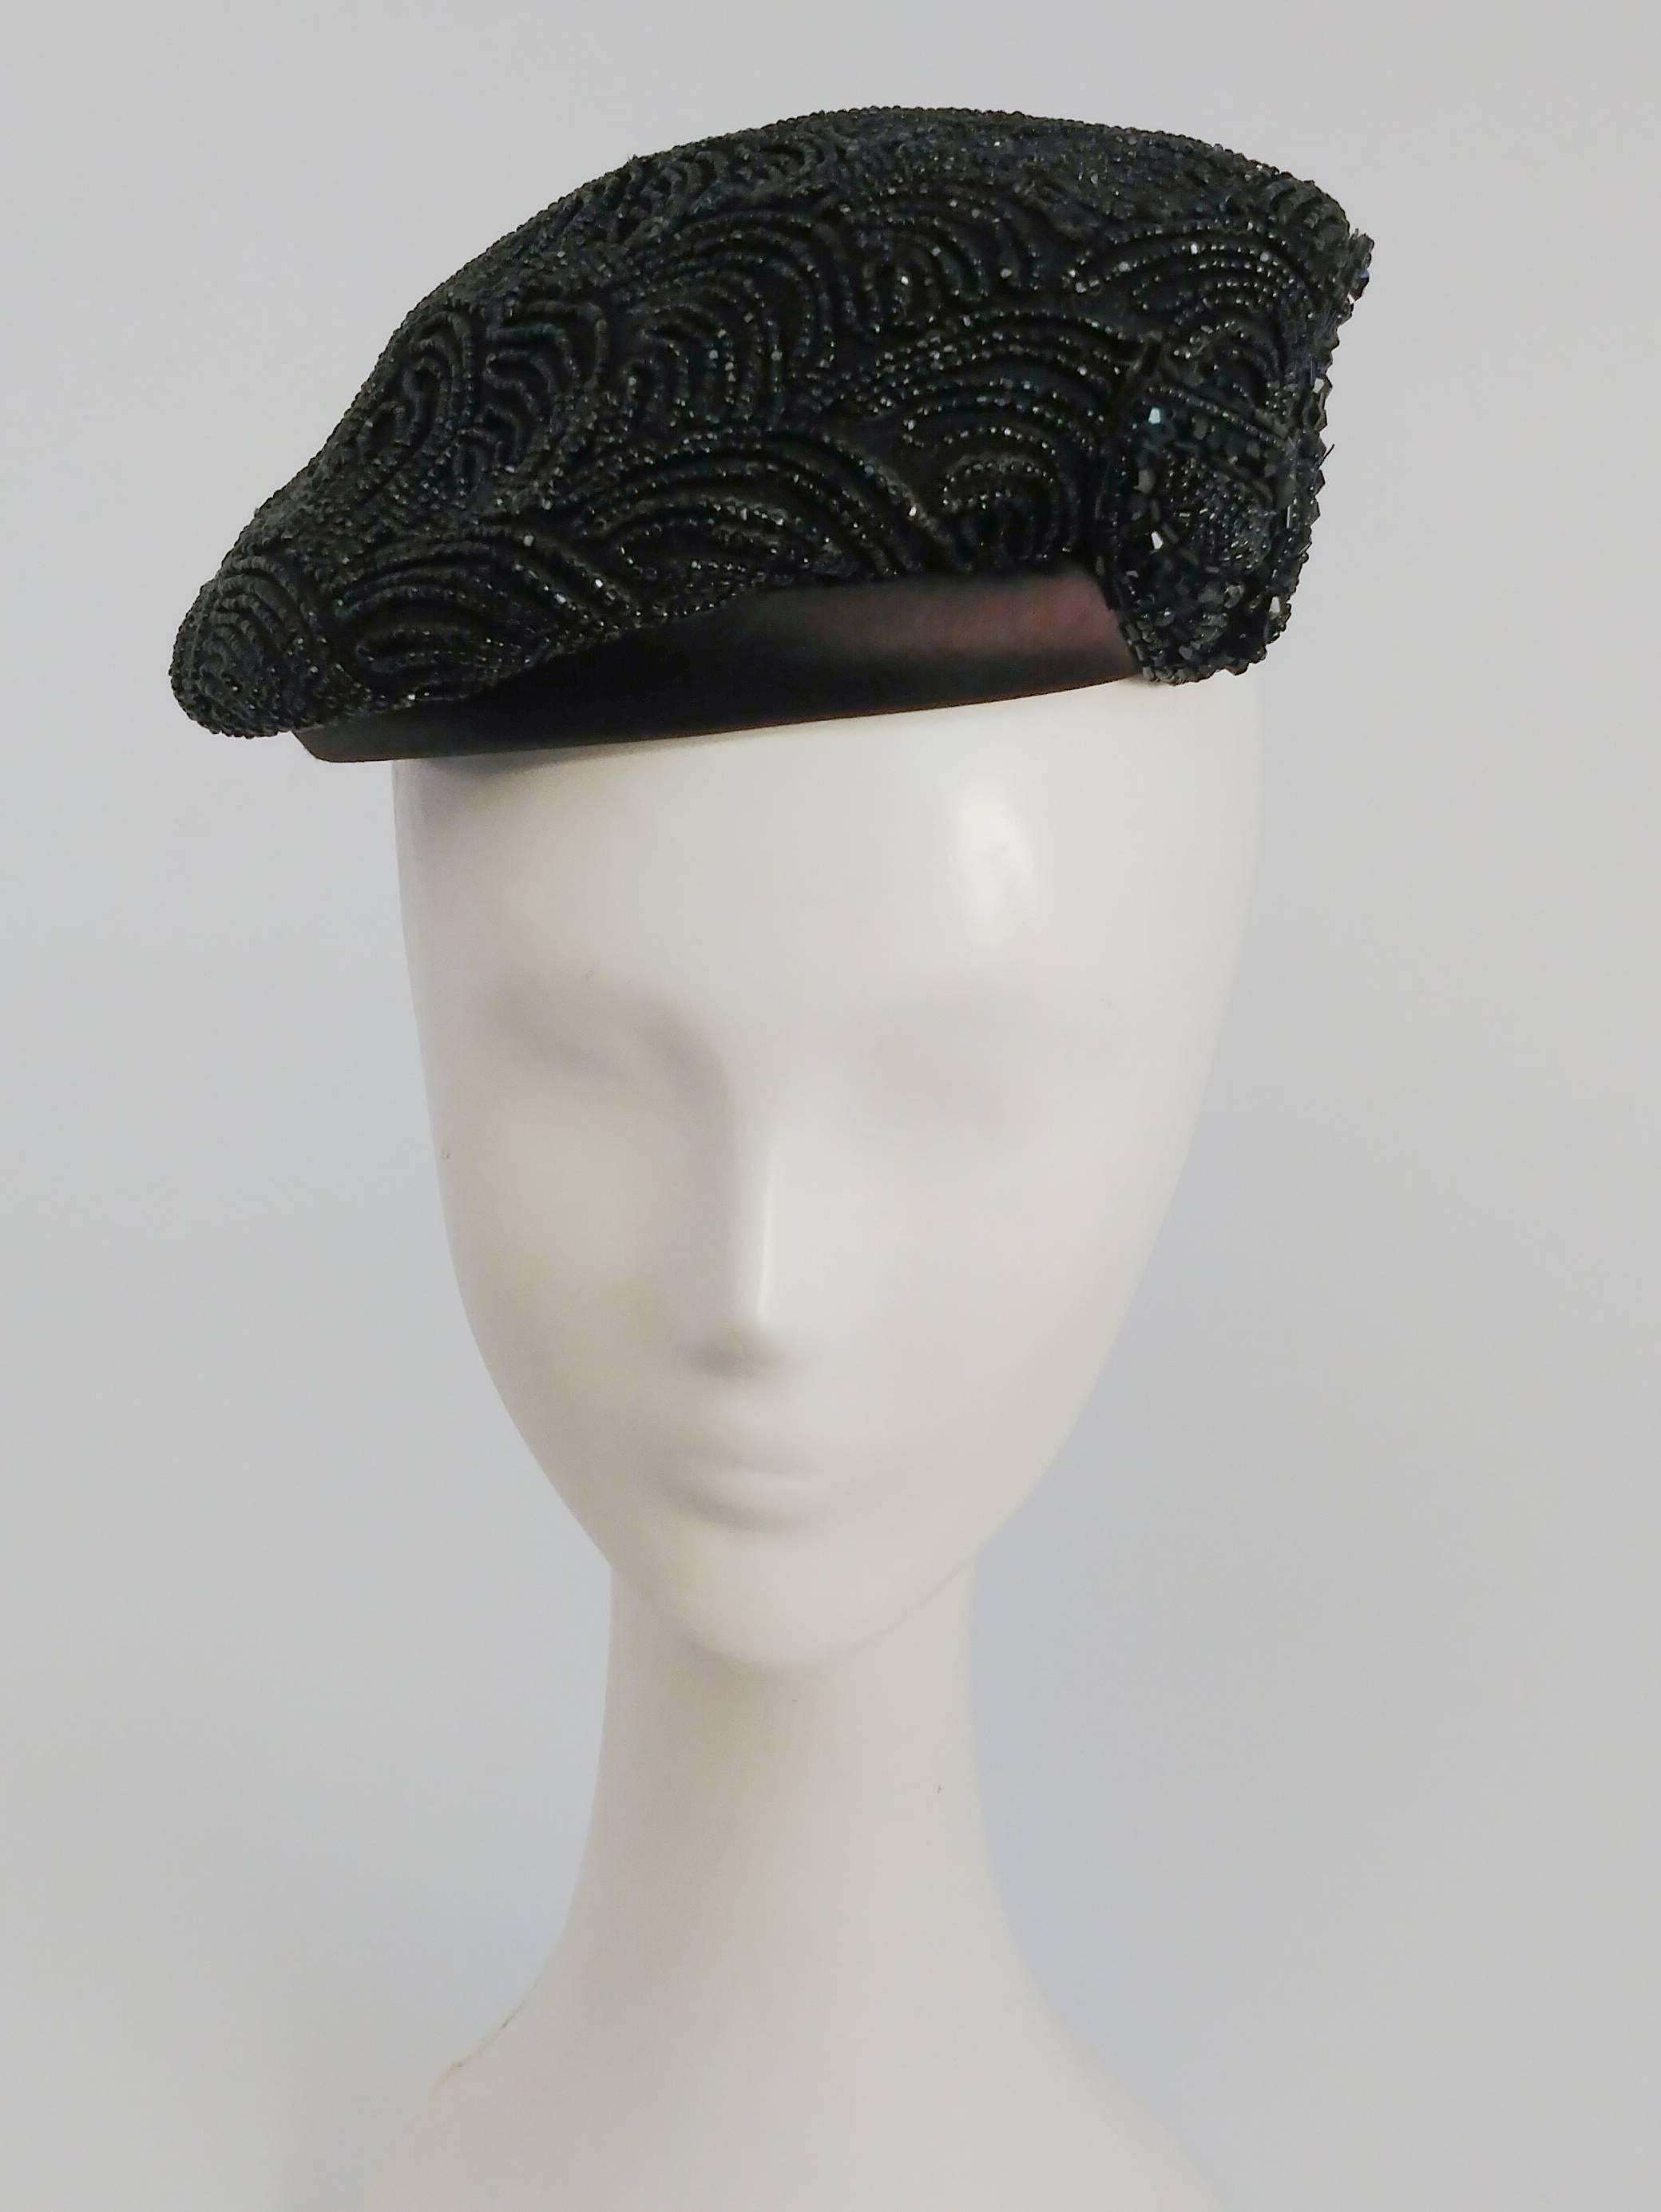 1940s Black Beaded Beret. All-over beaded hat perches on top of the head. One side is further embellished with a beaded applique leaf detail. Brown satin trim. 